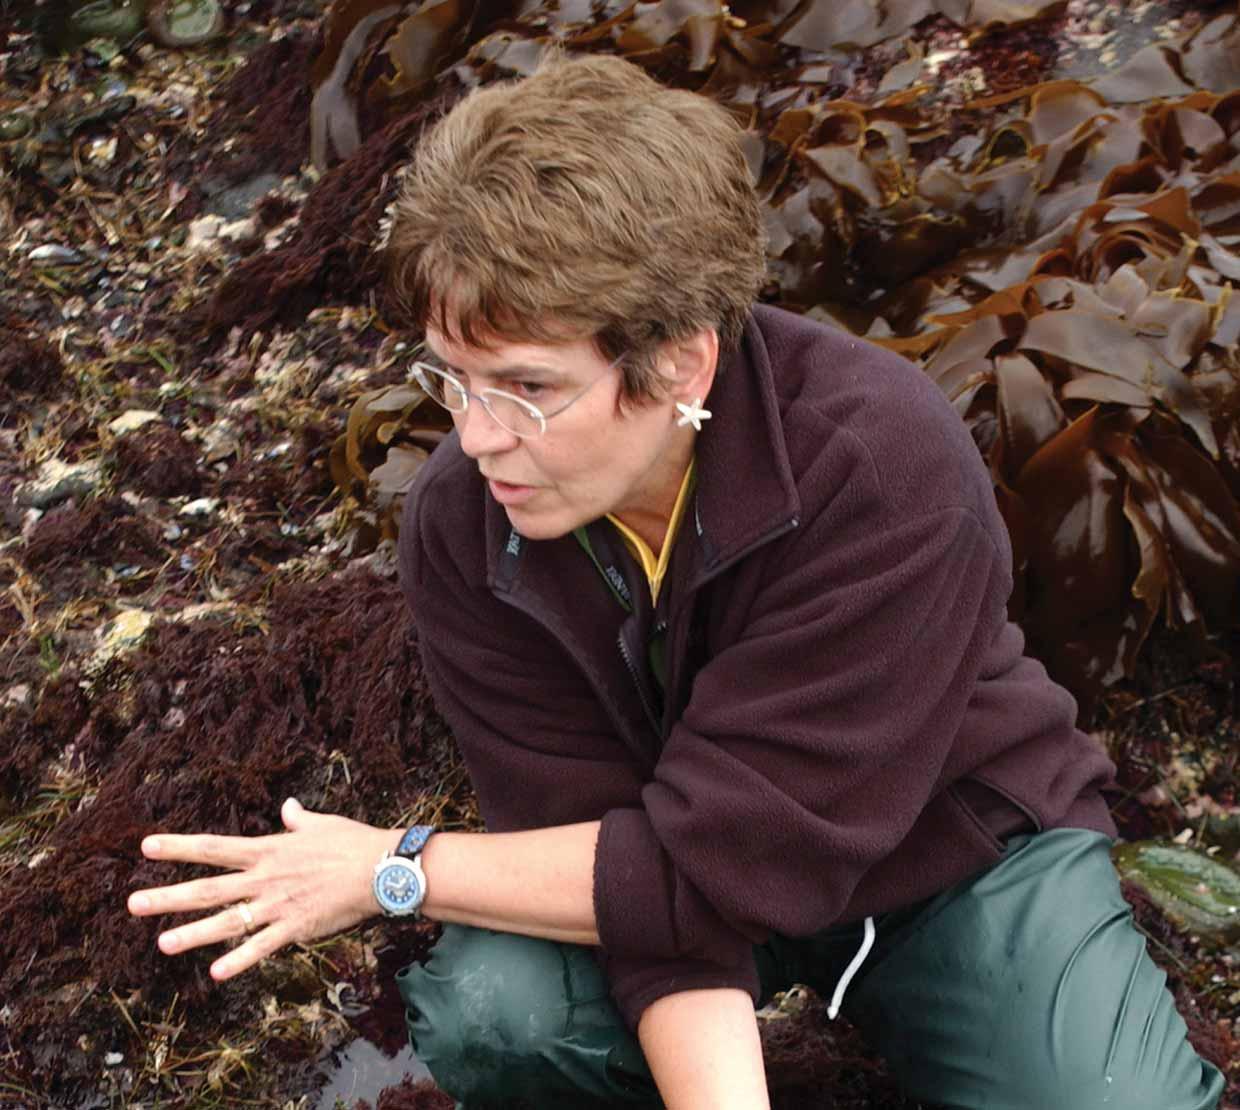 Jane Lubchenco sitting in seaweed and urchins